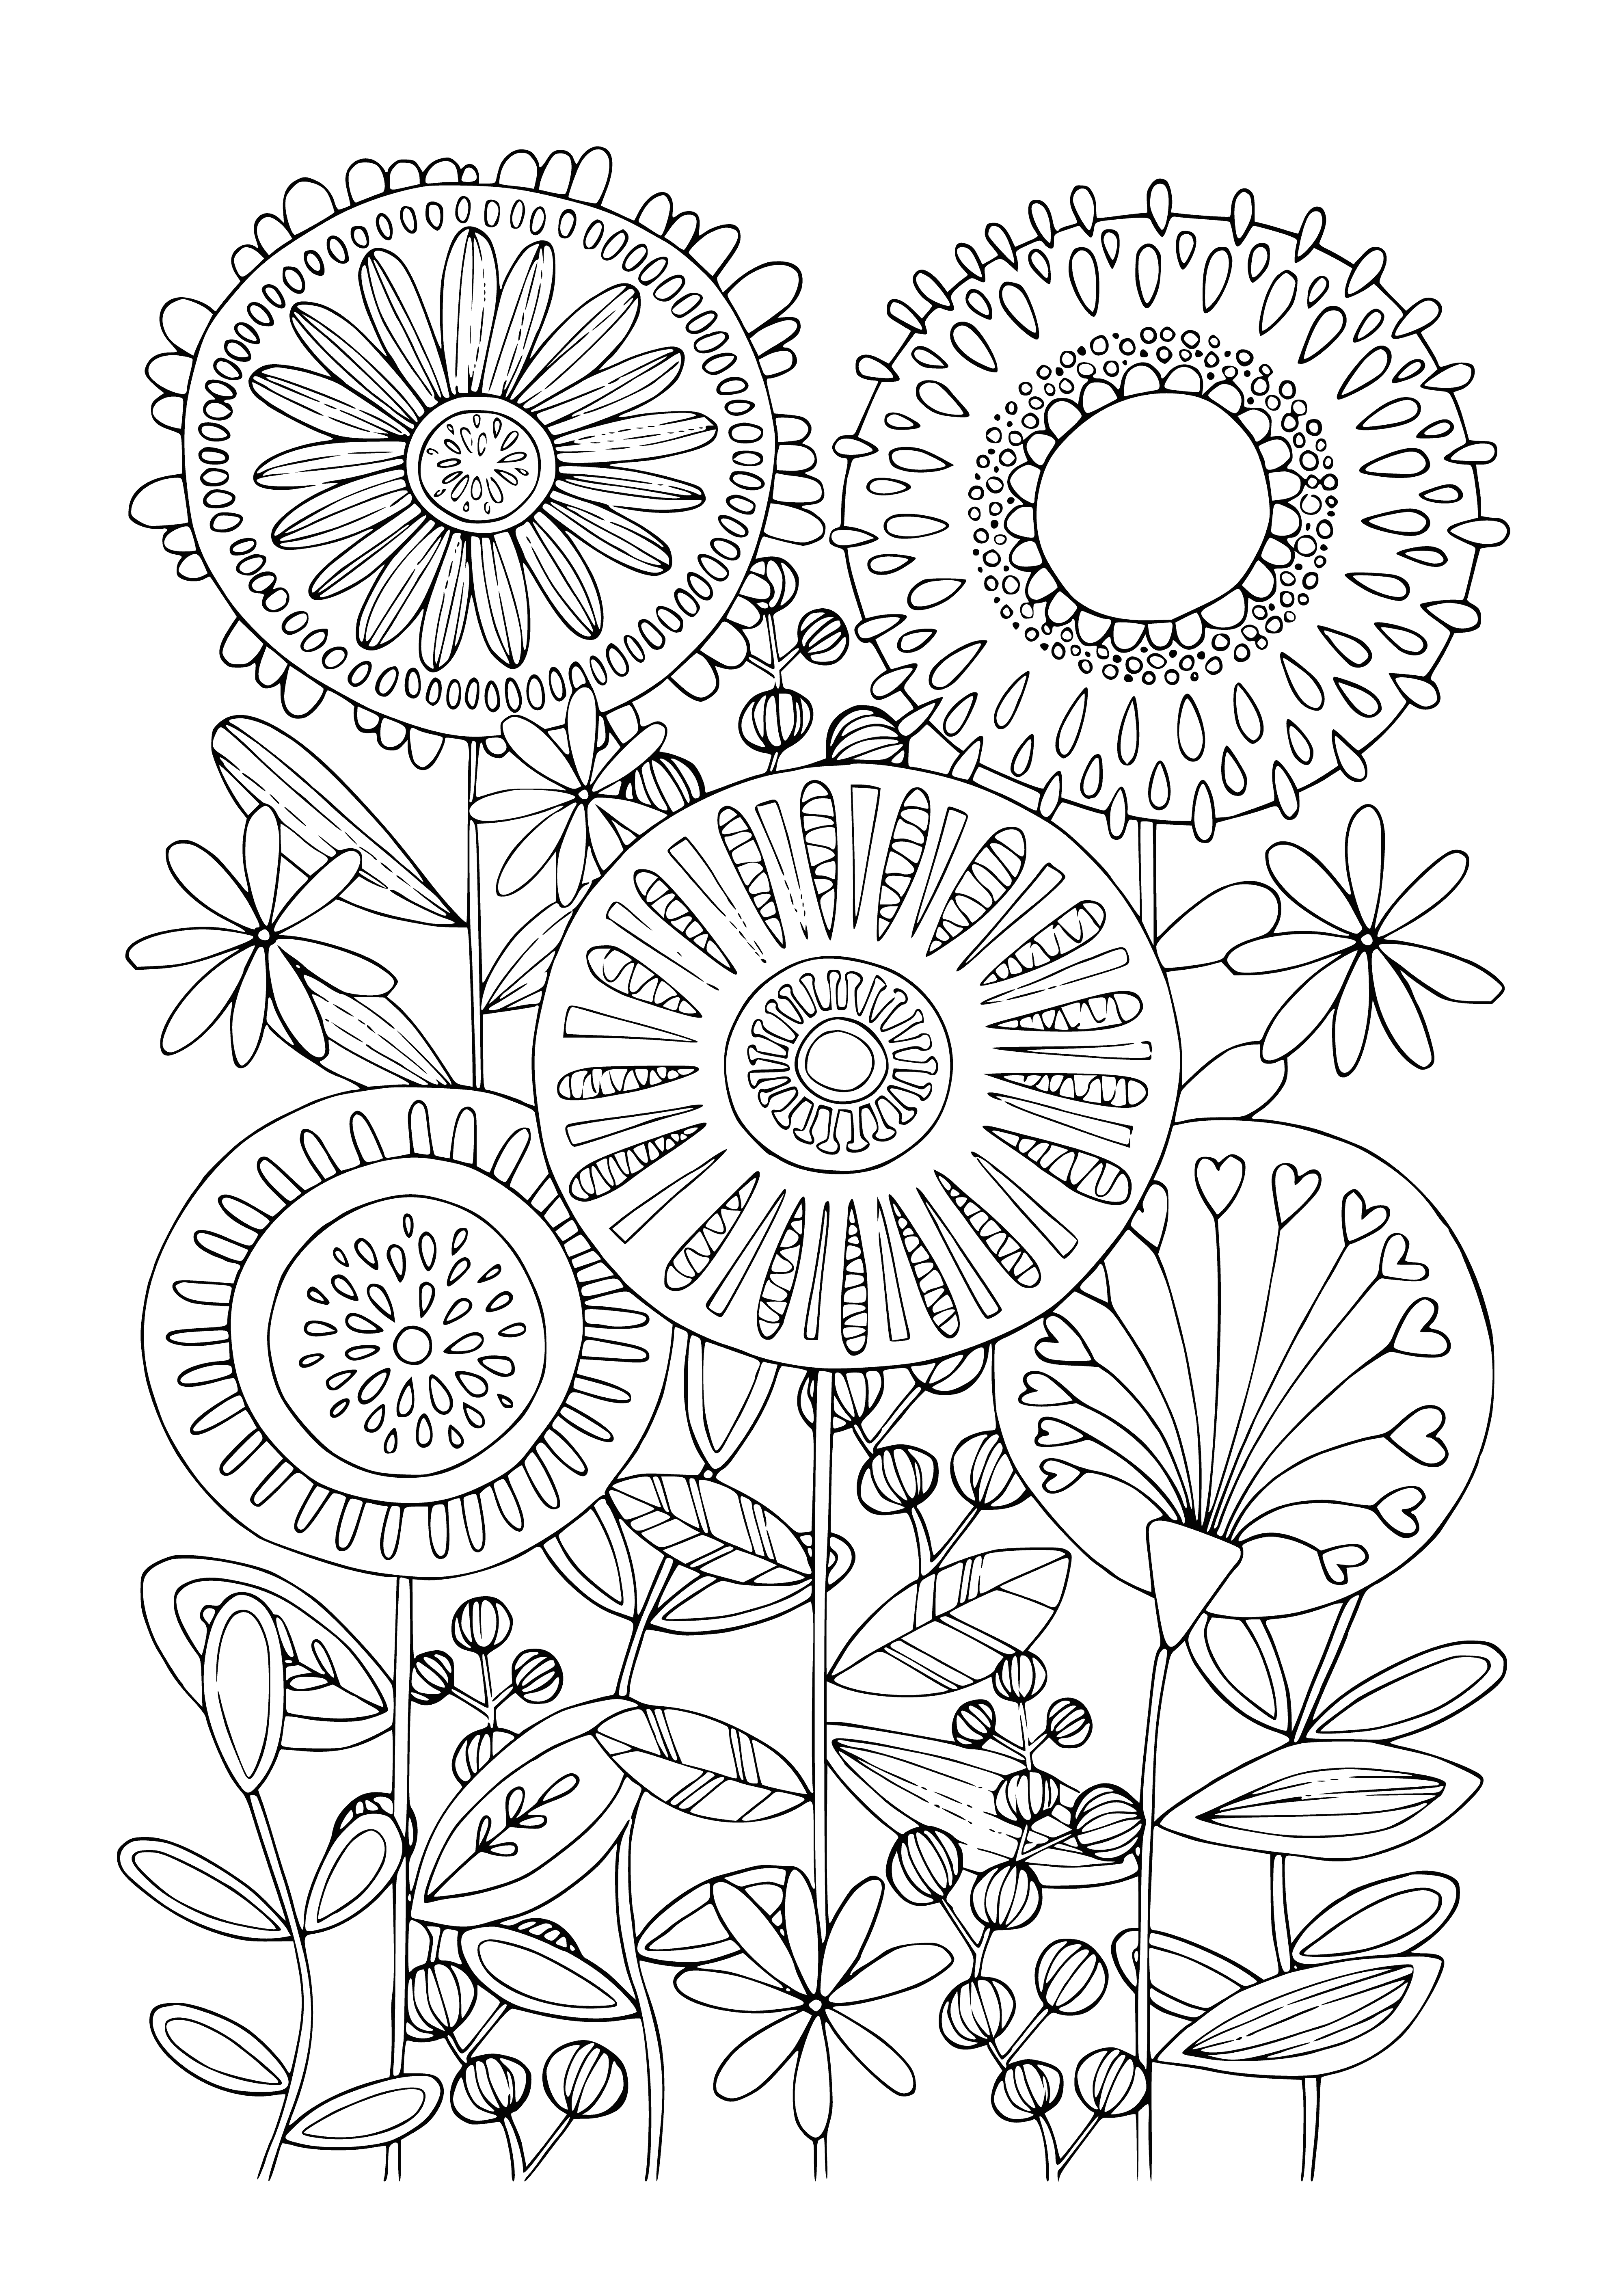 coloring page: A black & white coloring page of various flowers including roses, lilies, daisies & tulips in full bloom & bud form.